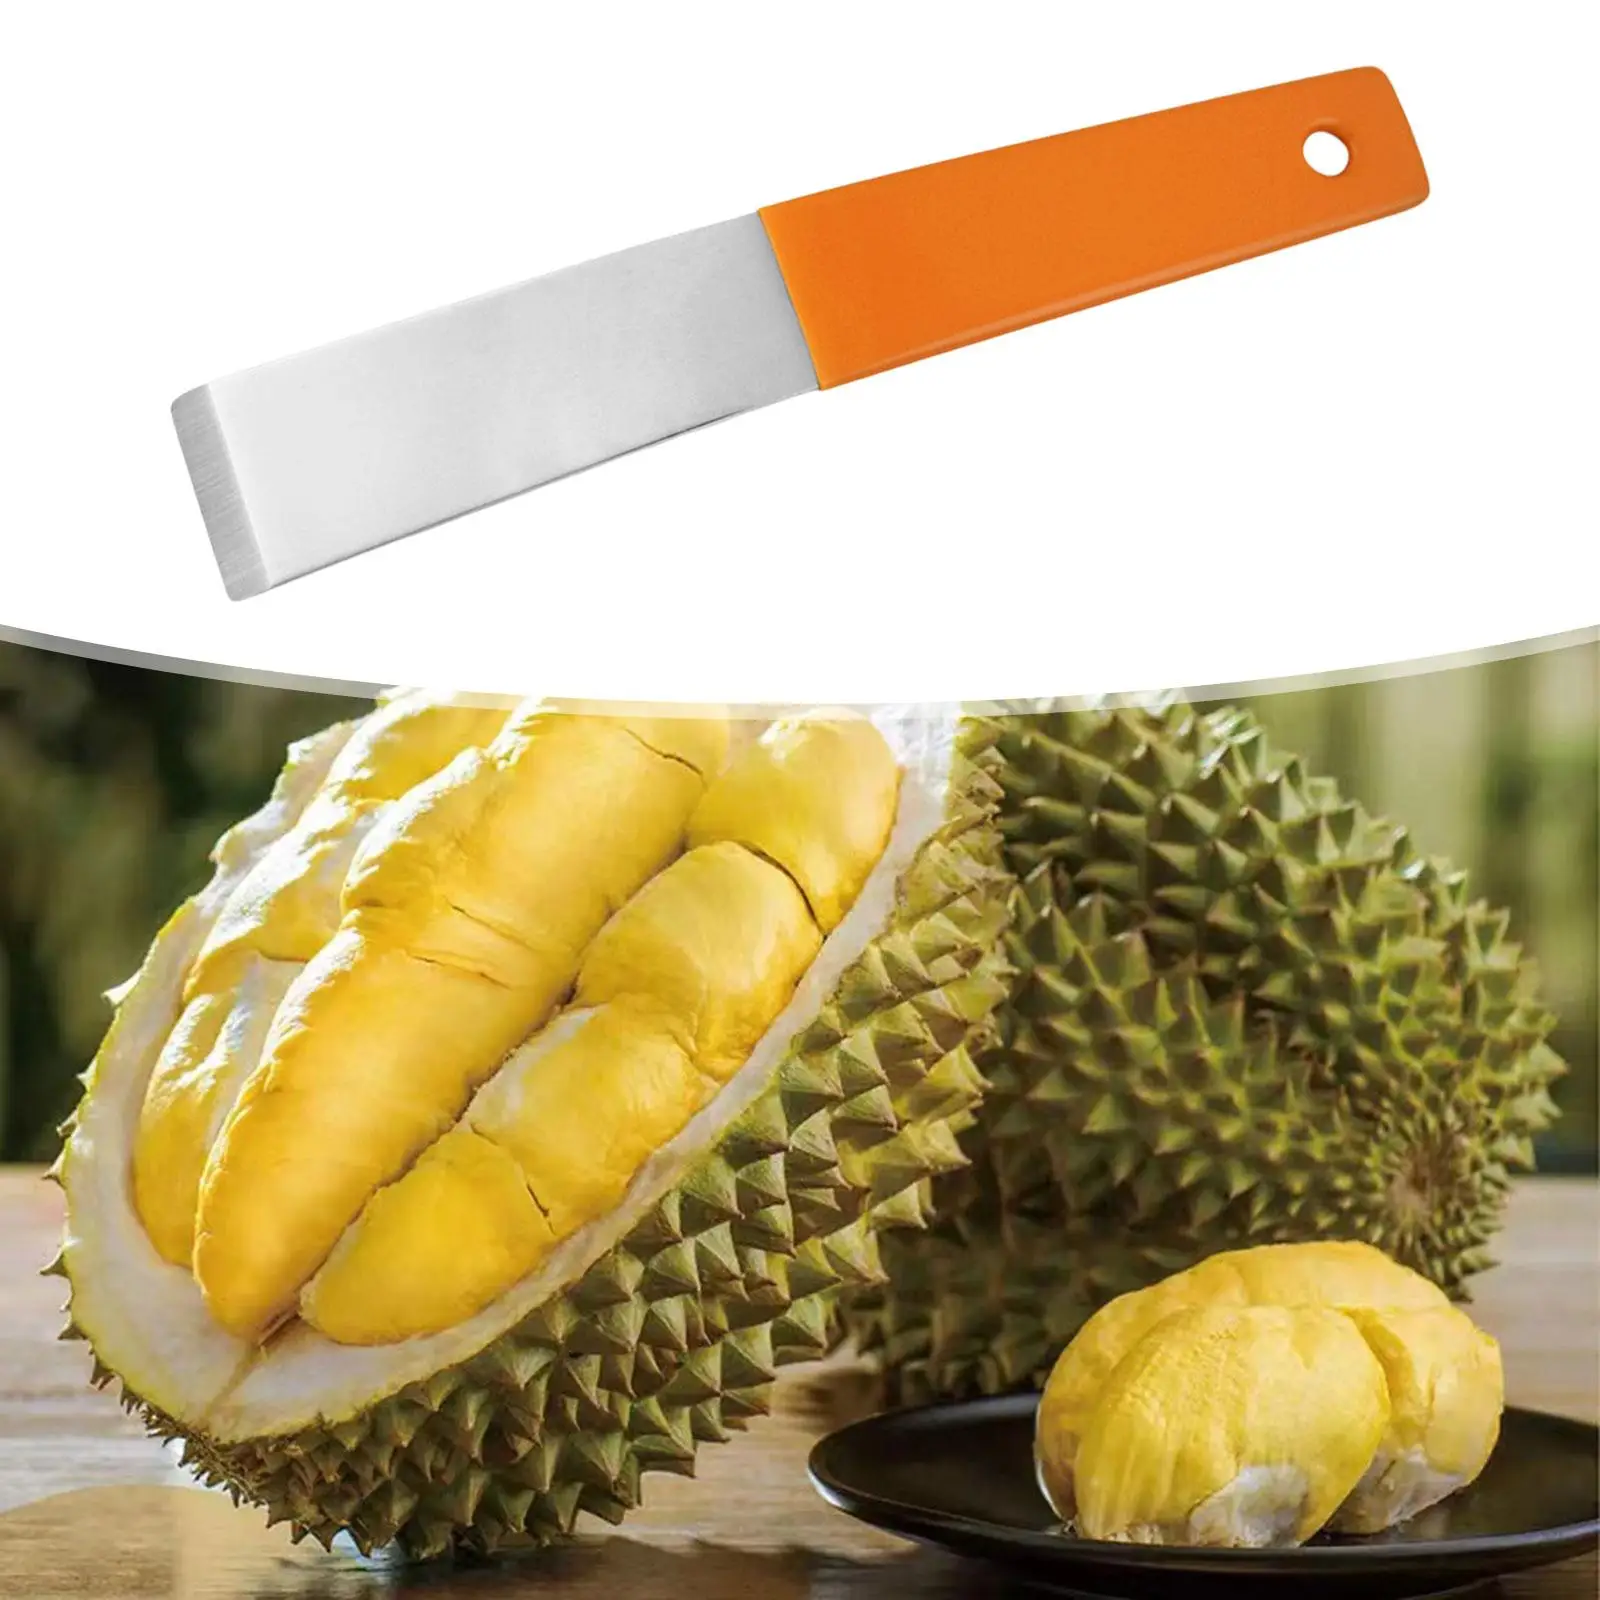 Manual Durian Shelling Machine, Durian Peel Breaking Tool, Peeling Smooth Cutter, Durian Opener for Cooking